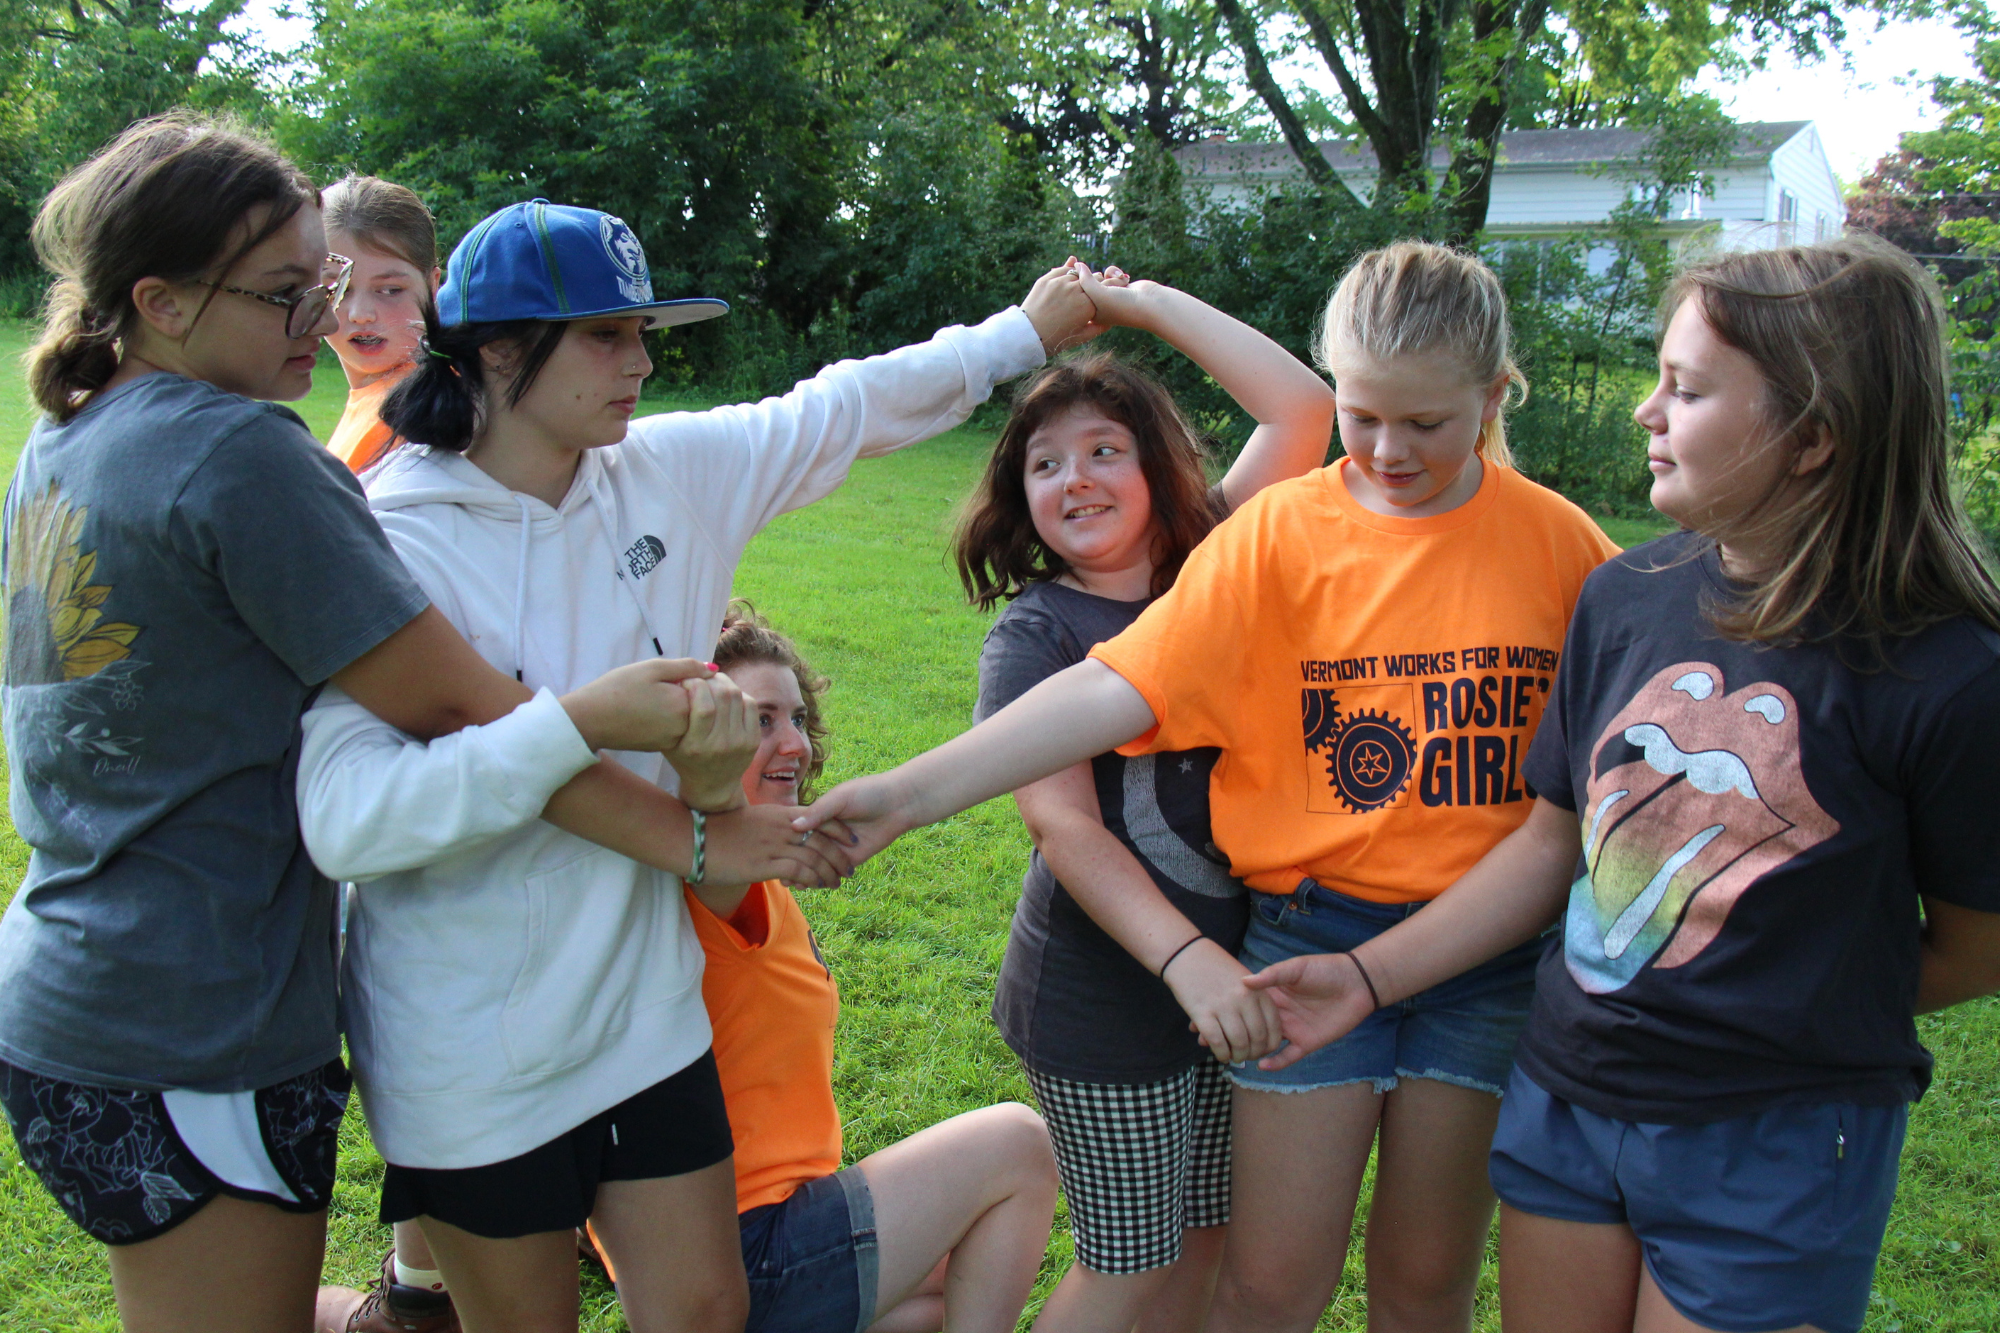 Rosie's Girls campers play a game at summer campe